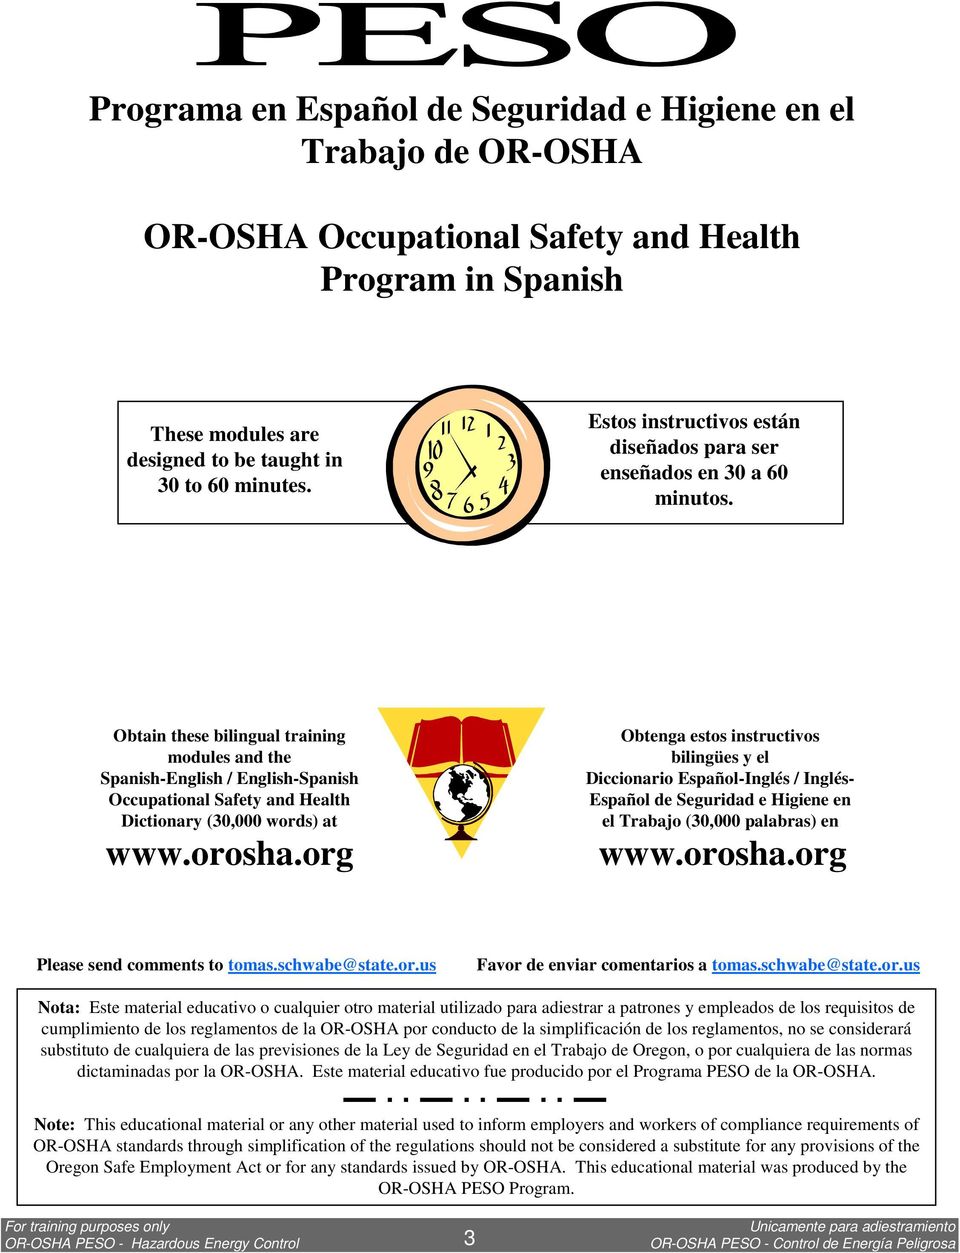 Obtain these bilingual training modules and the Spanish-English / English-Spanish Occupational Safety and Health Dictionary (30,000 words) at www.orosha.